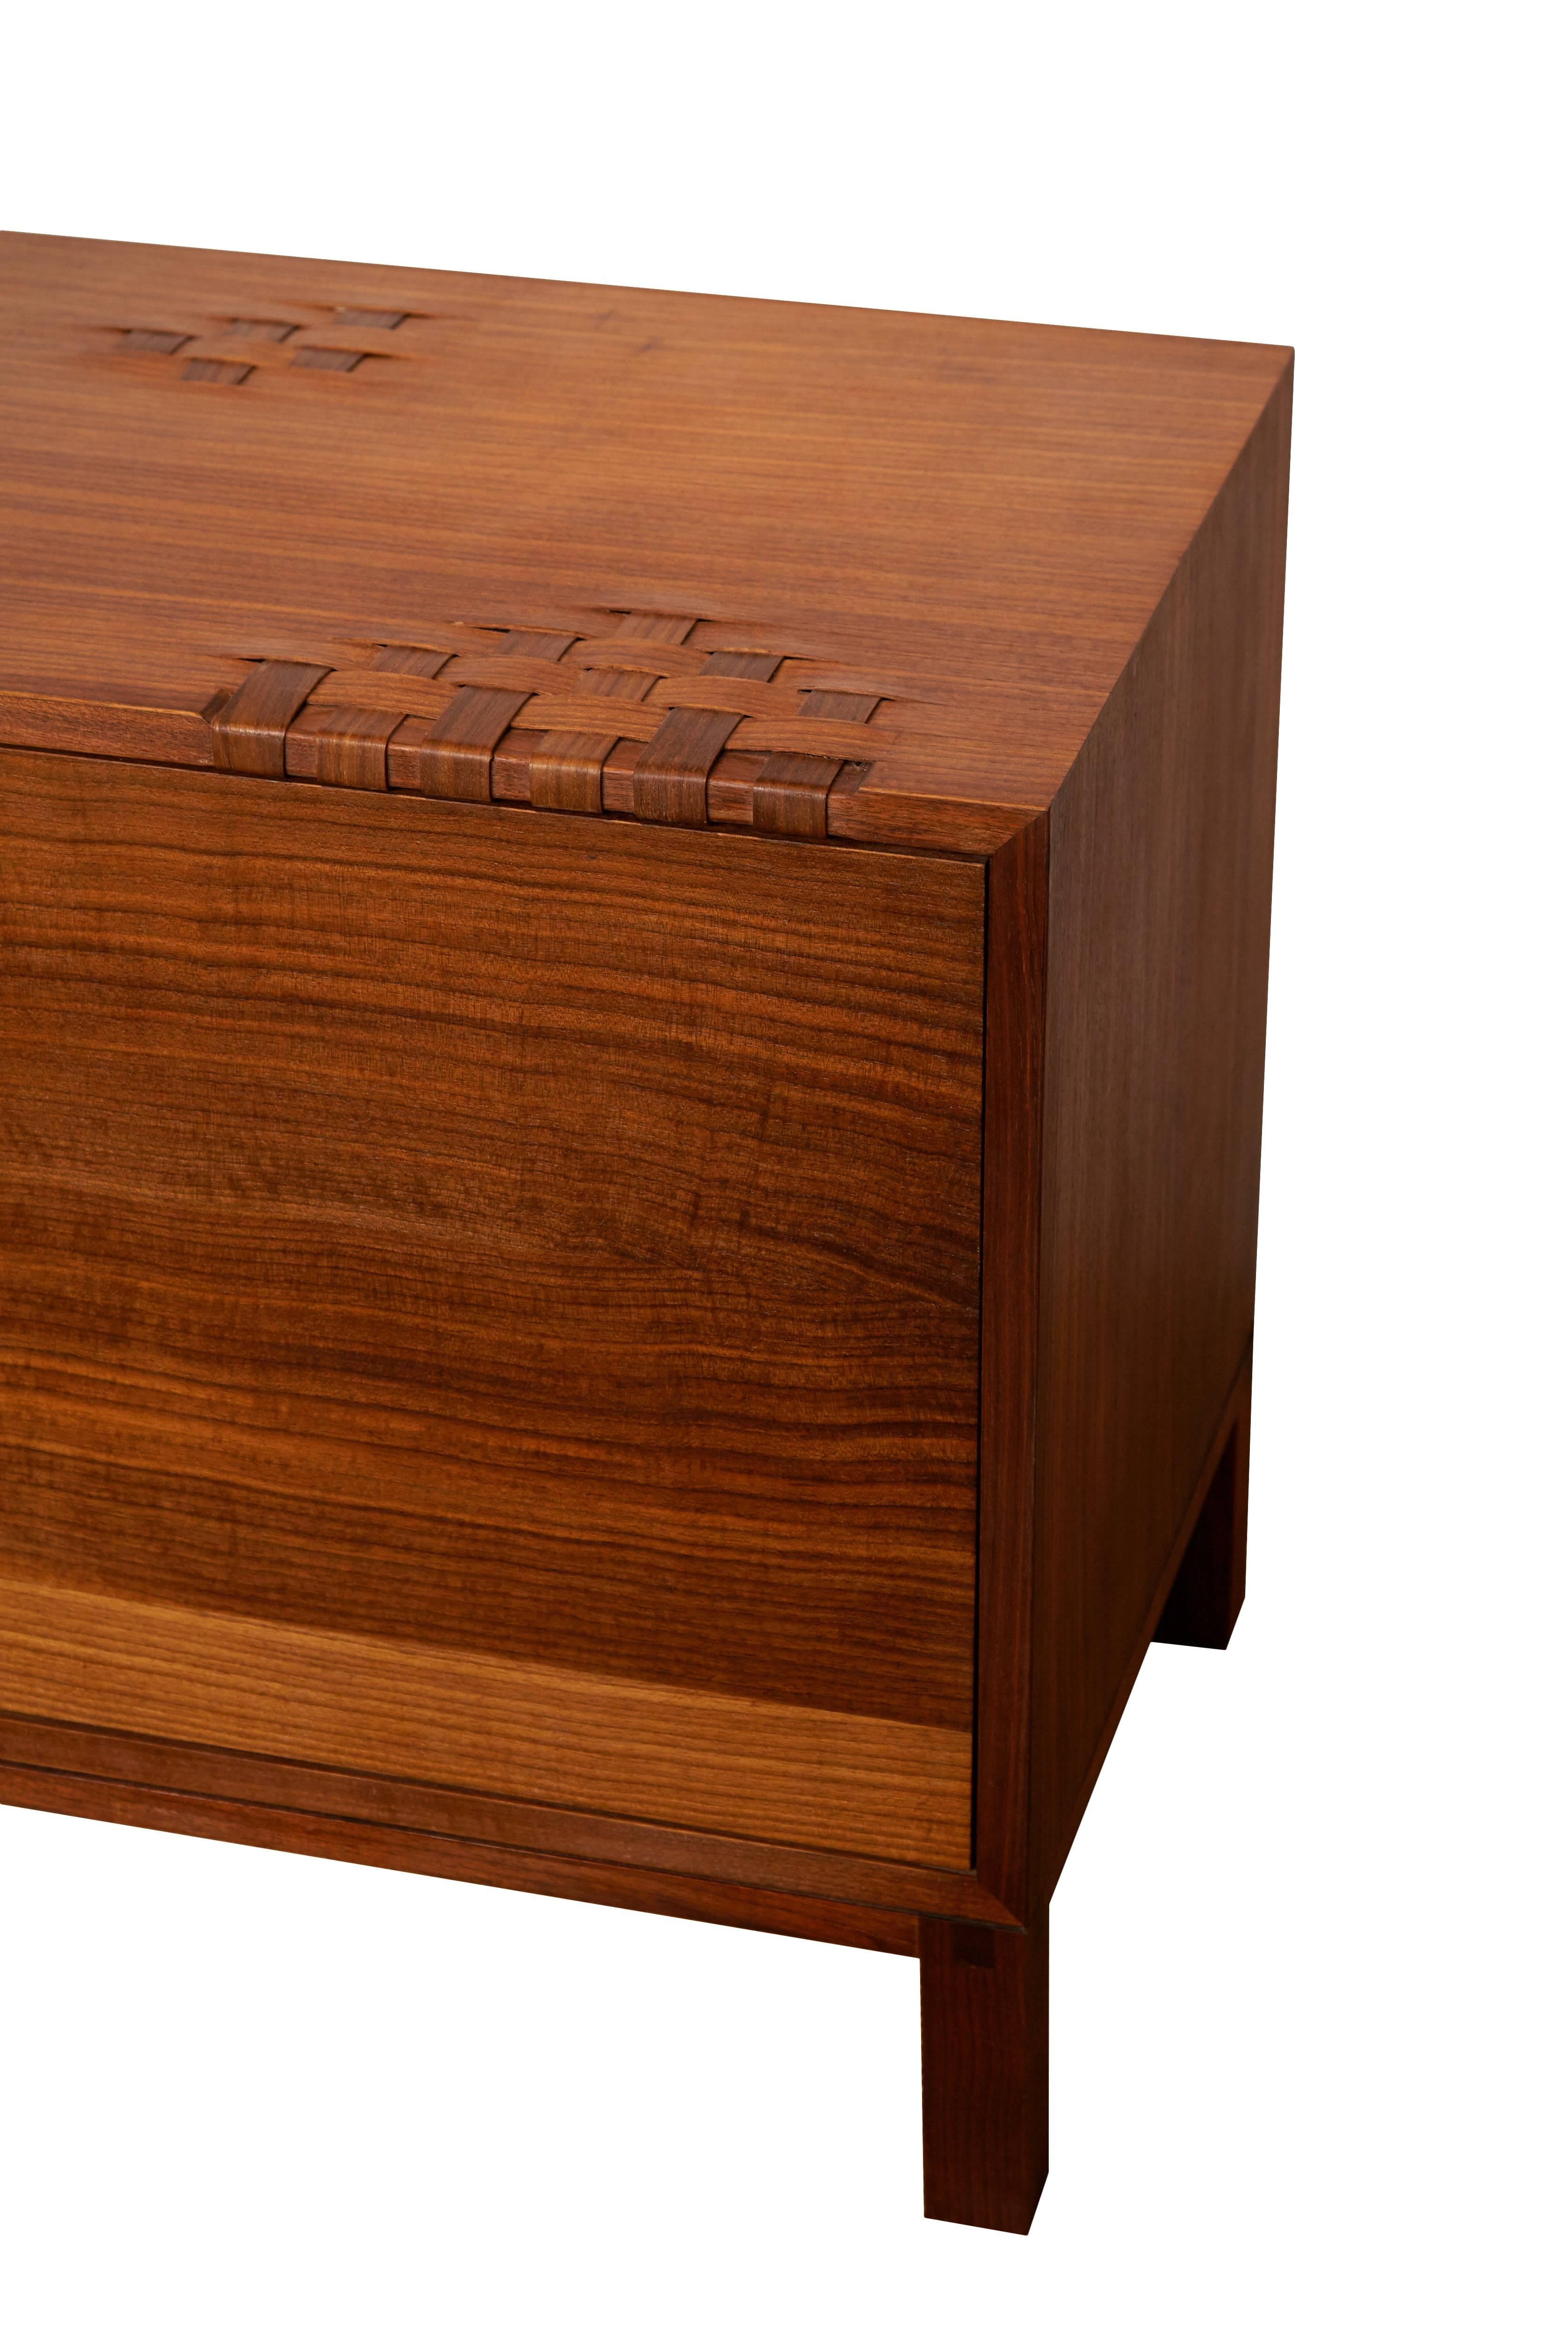 Contemporary Walnut Weave Credenza by Don Howell For Sale